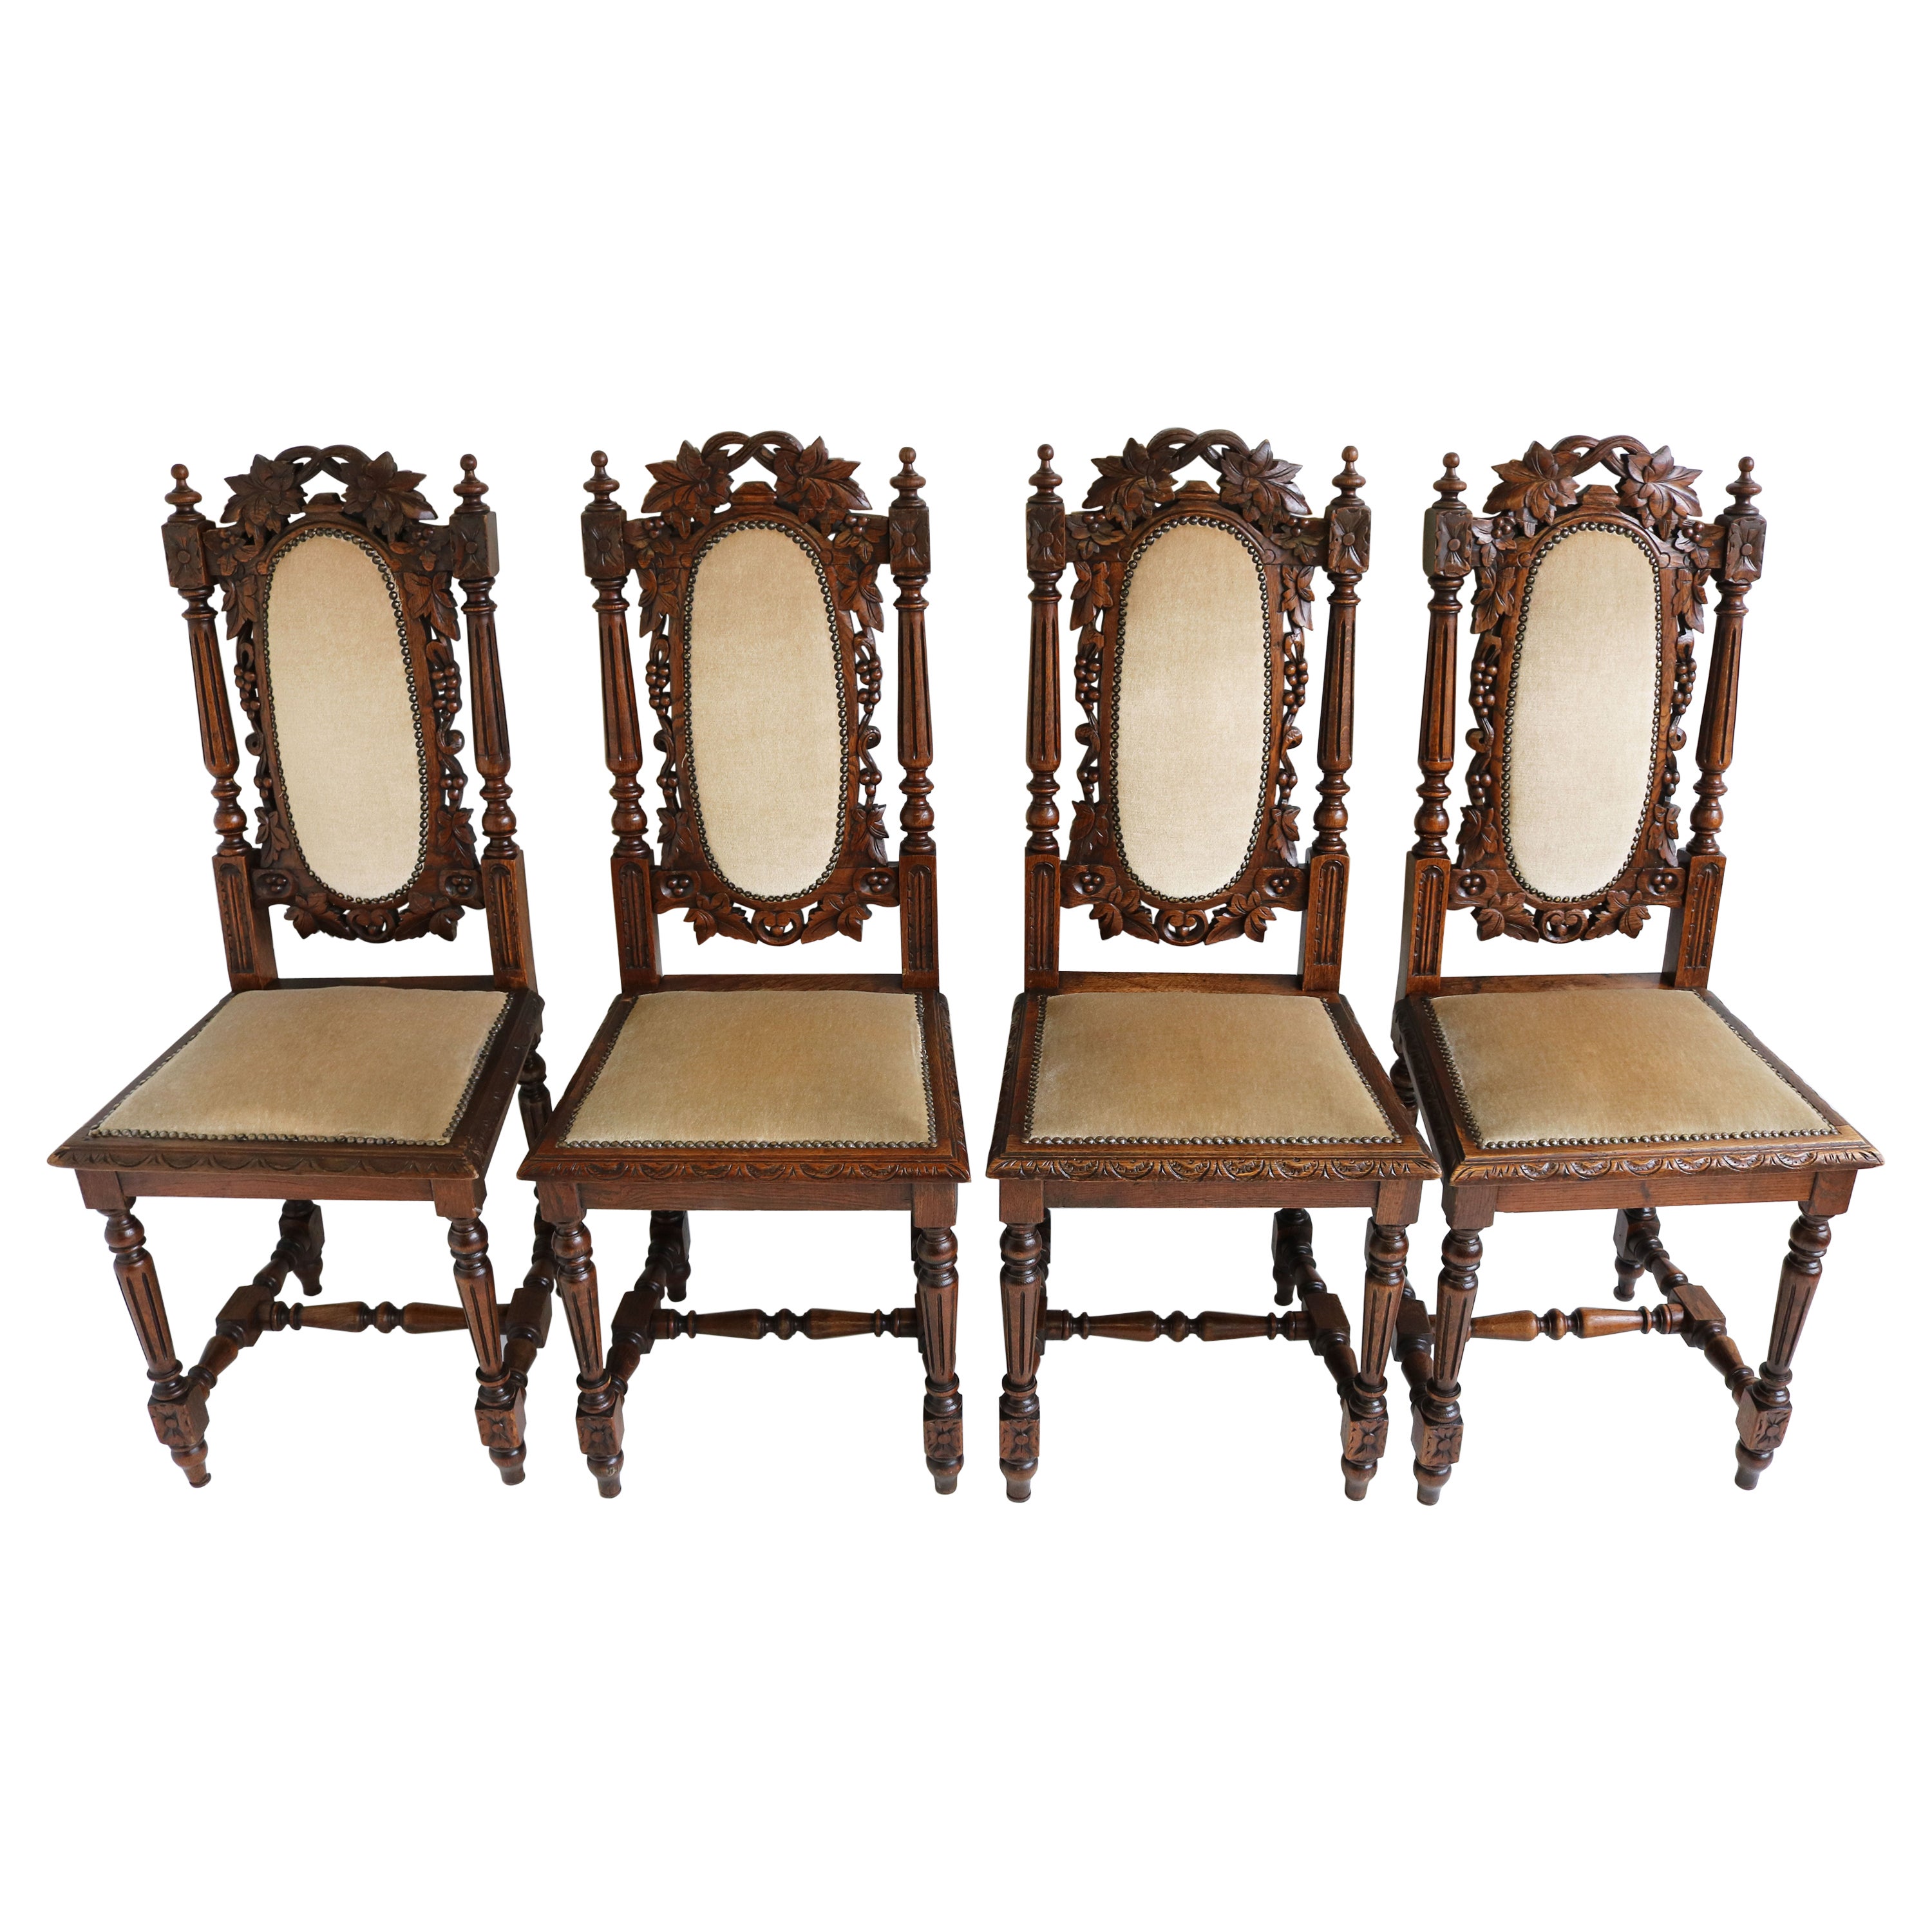 Set of 4 French Renaissance Revival Hunting Style Chairs Carved Oak Black Forest